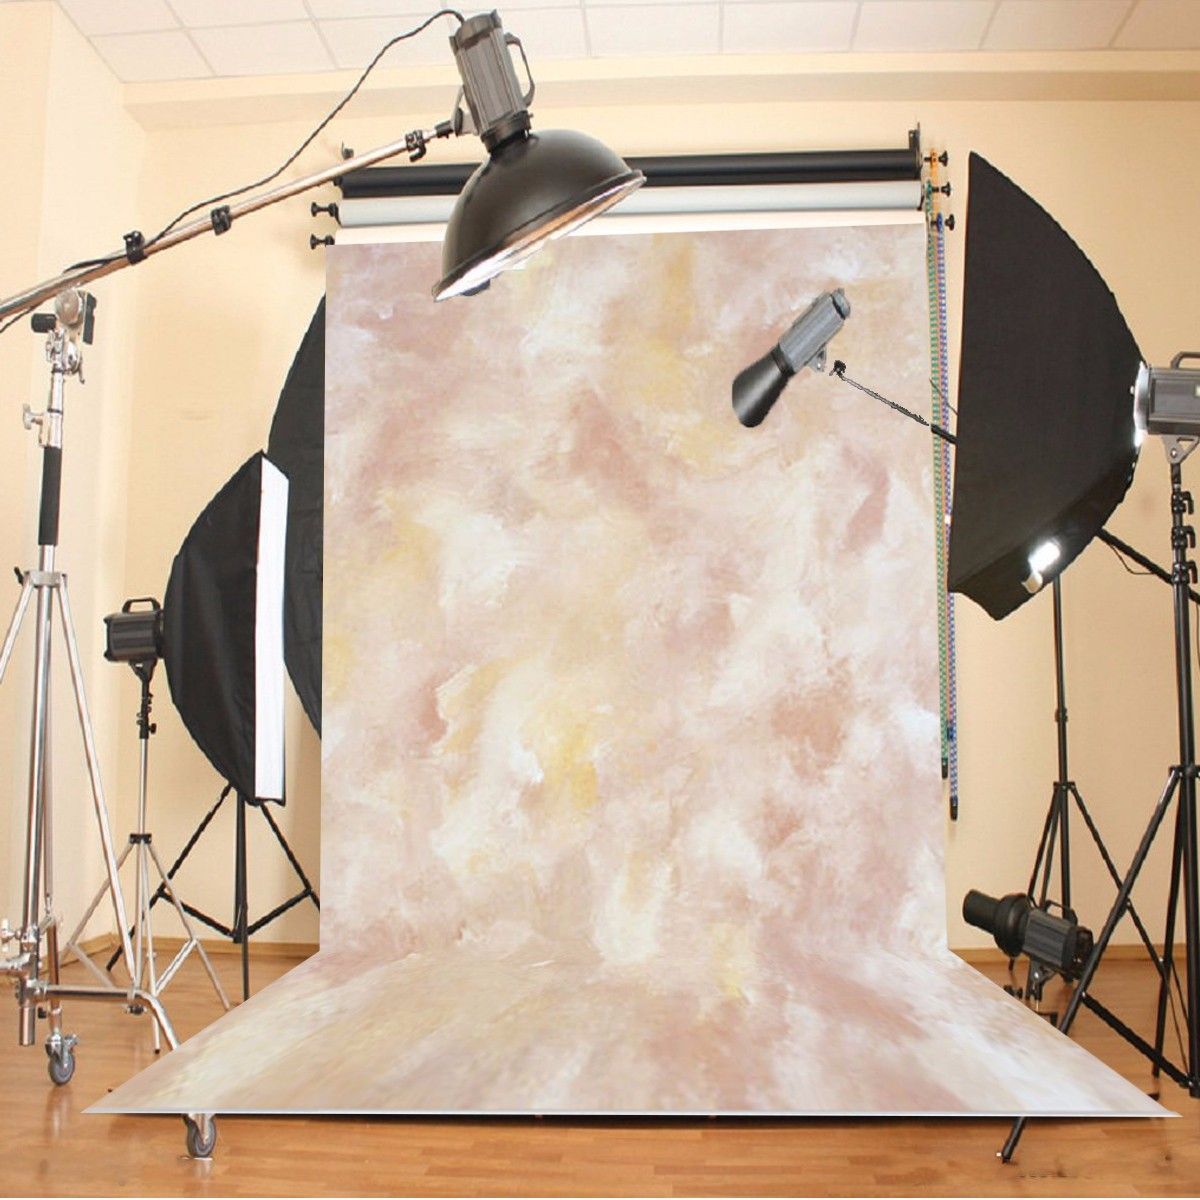 15x21m-Photography-Abstract-Fabric-Background-Fabric-Flat-Studio-Backdrop-1130350